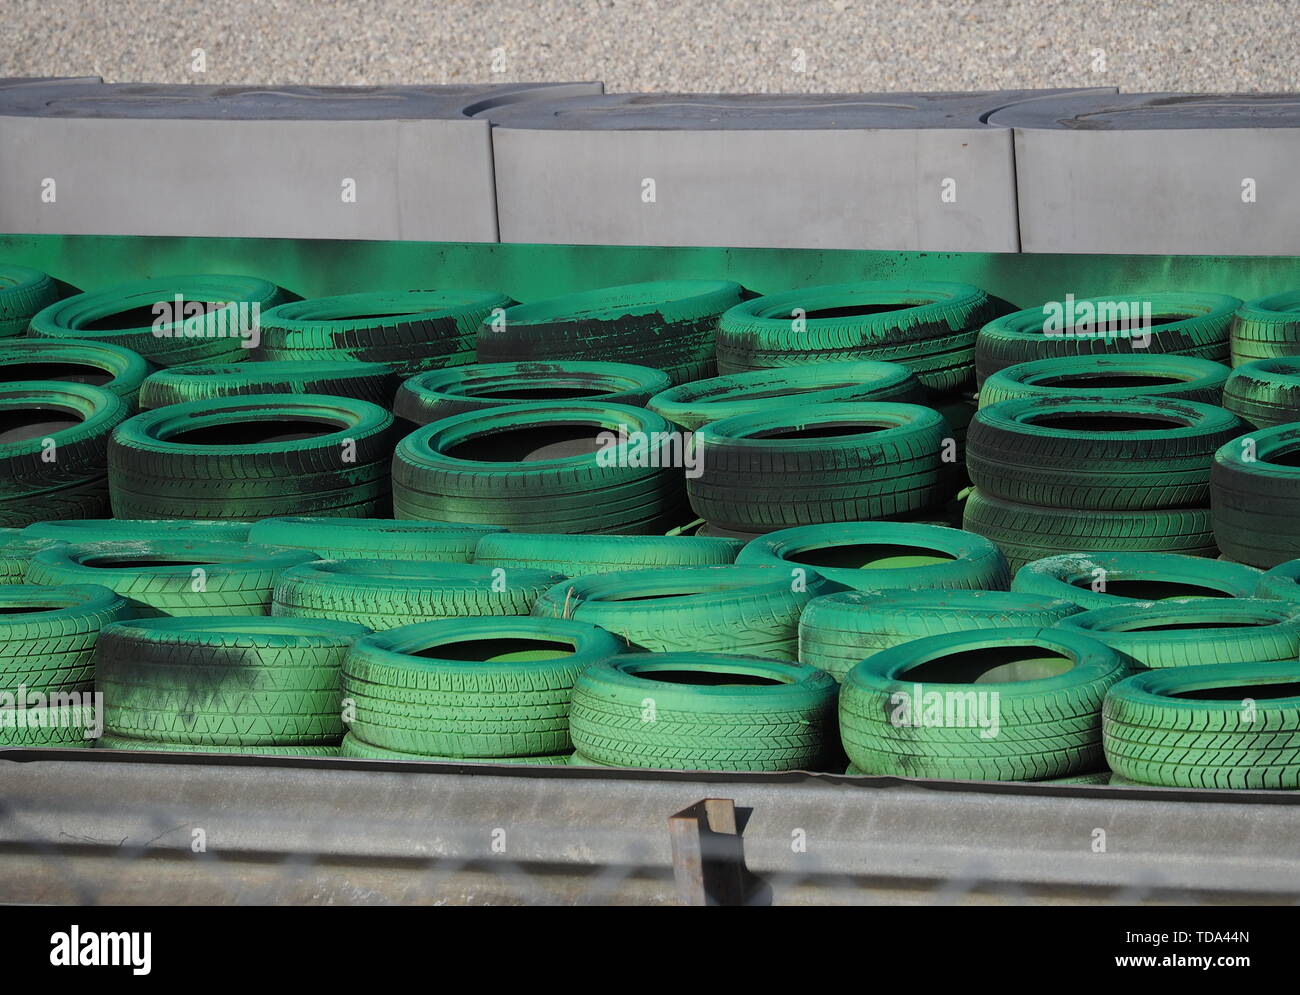 Green car tires, used for safety on Monza circuit Stock Photo